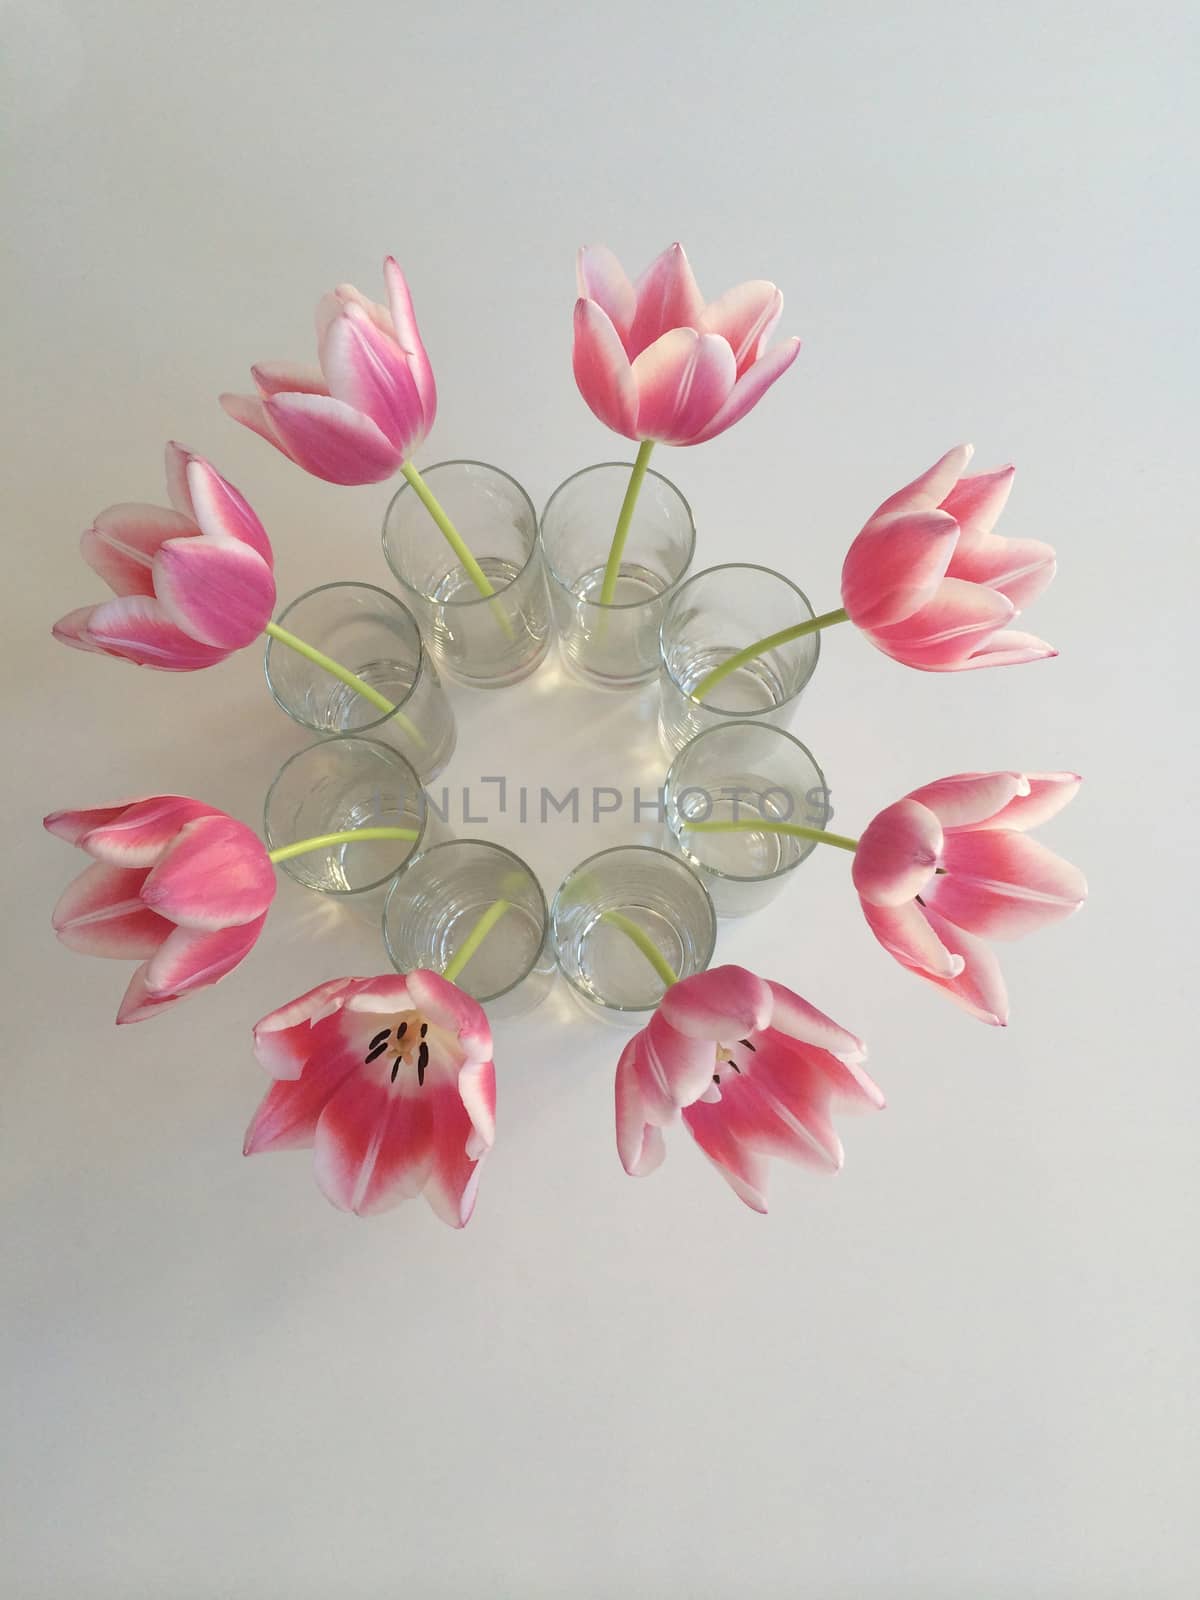 Pink tulips in vase by mmm